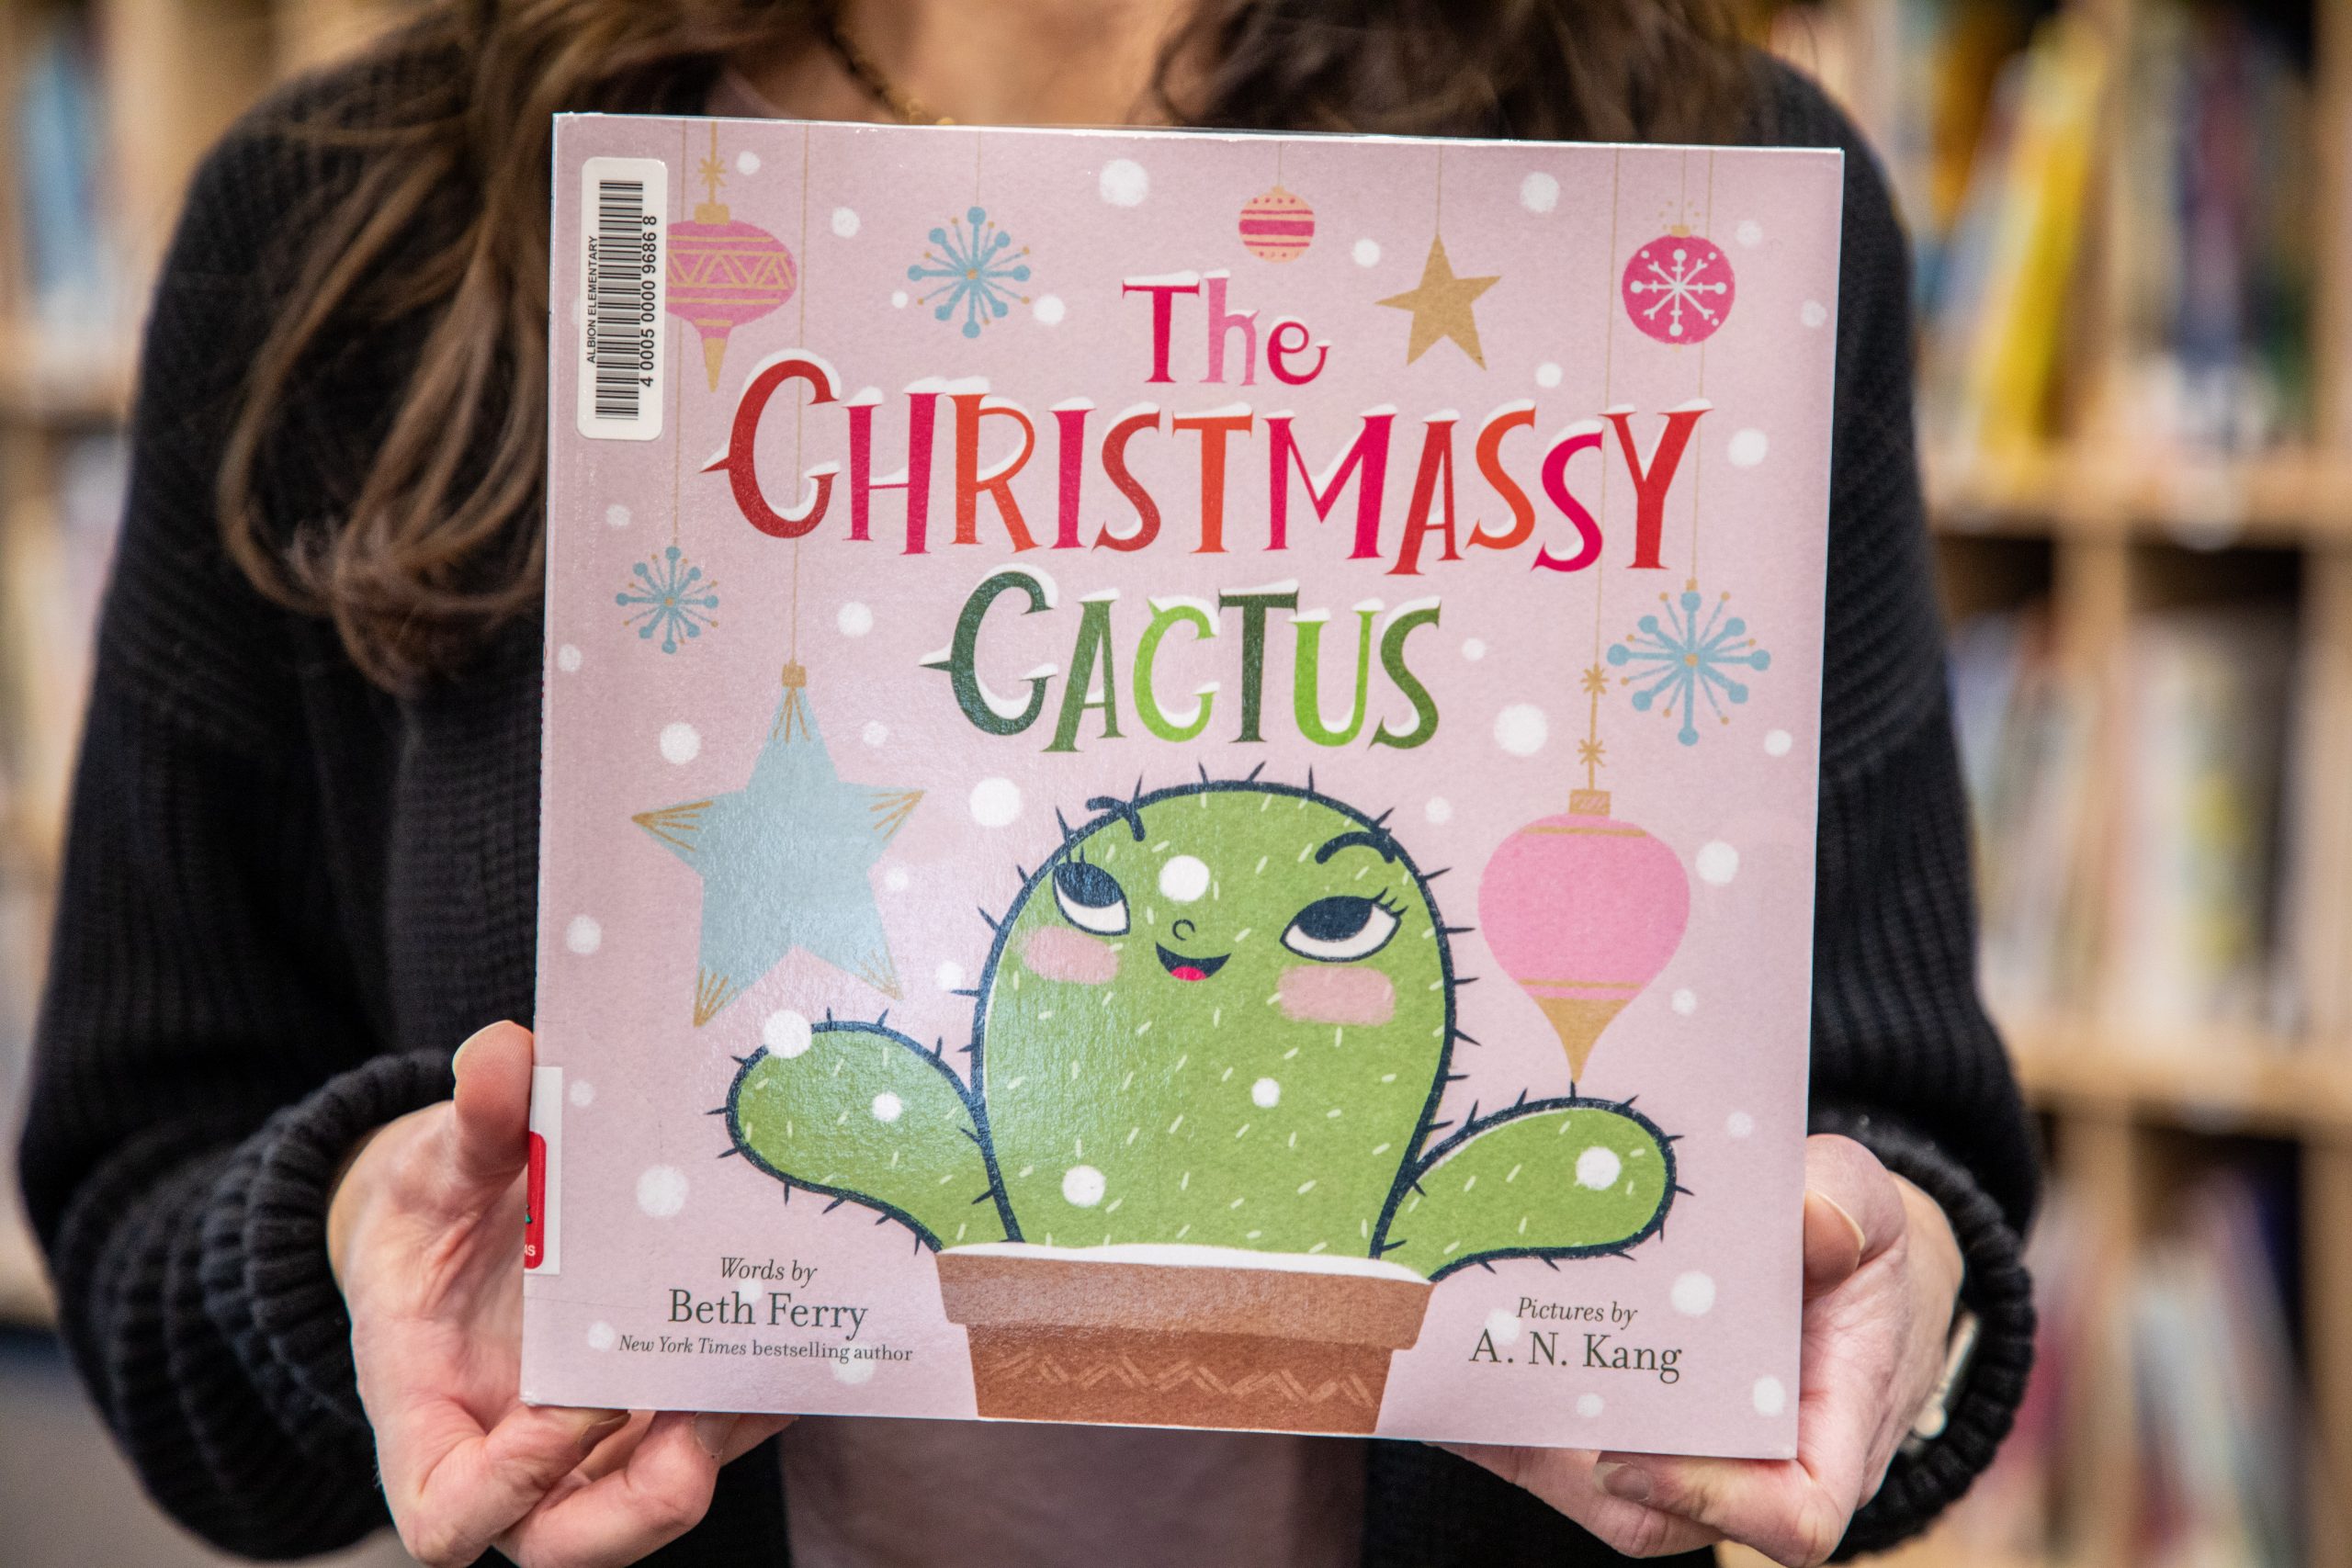 The front cover of "The Christmassy Cactus" by Beth Ferry.